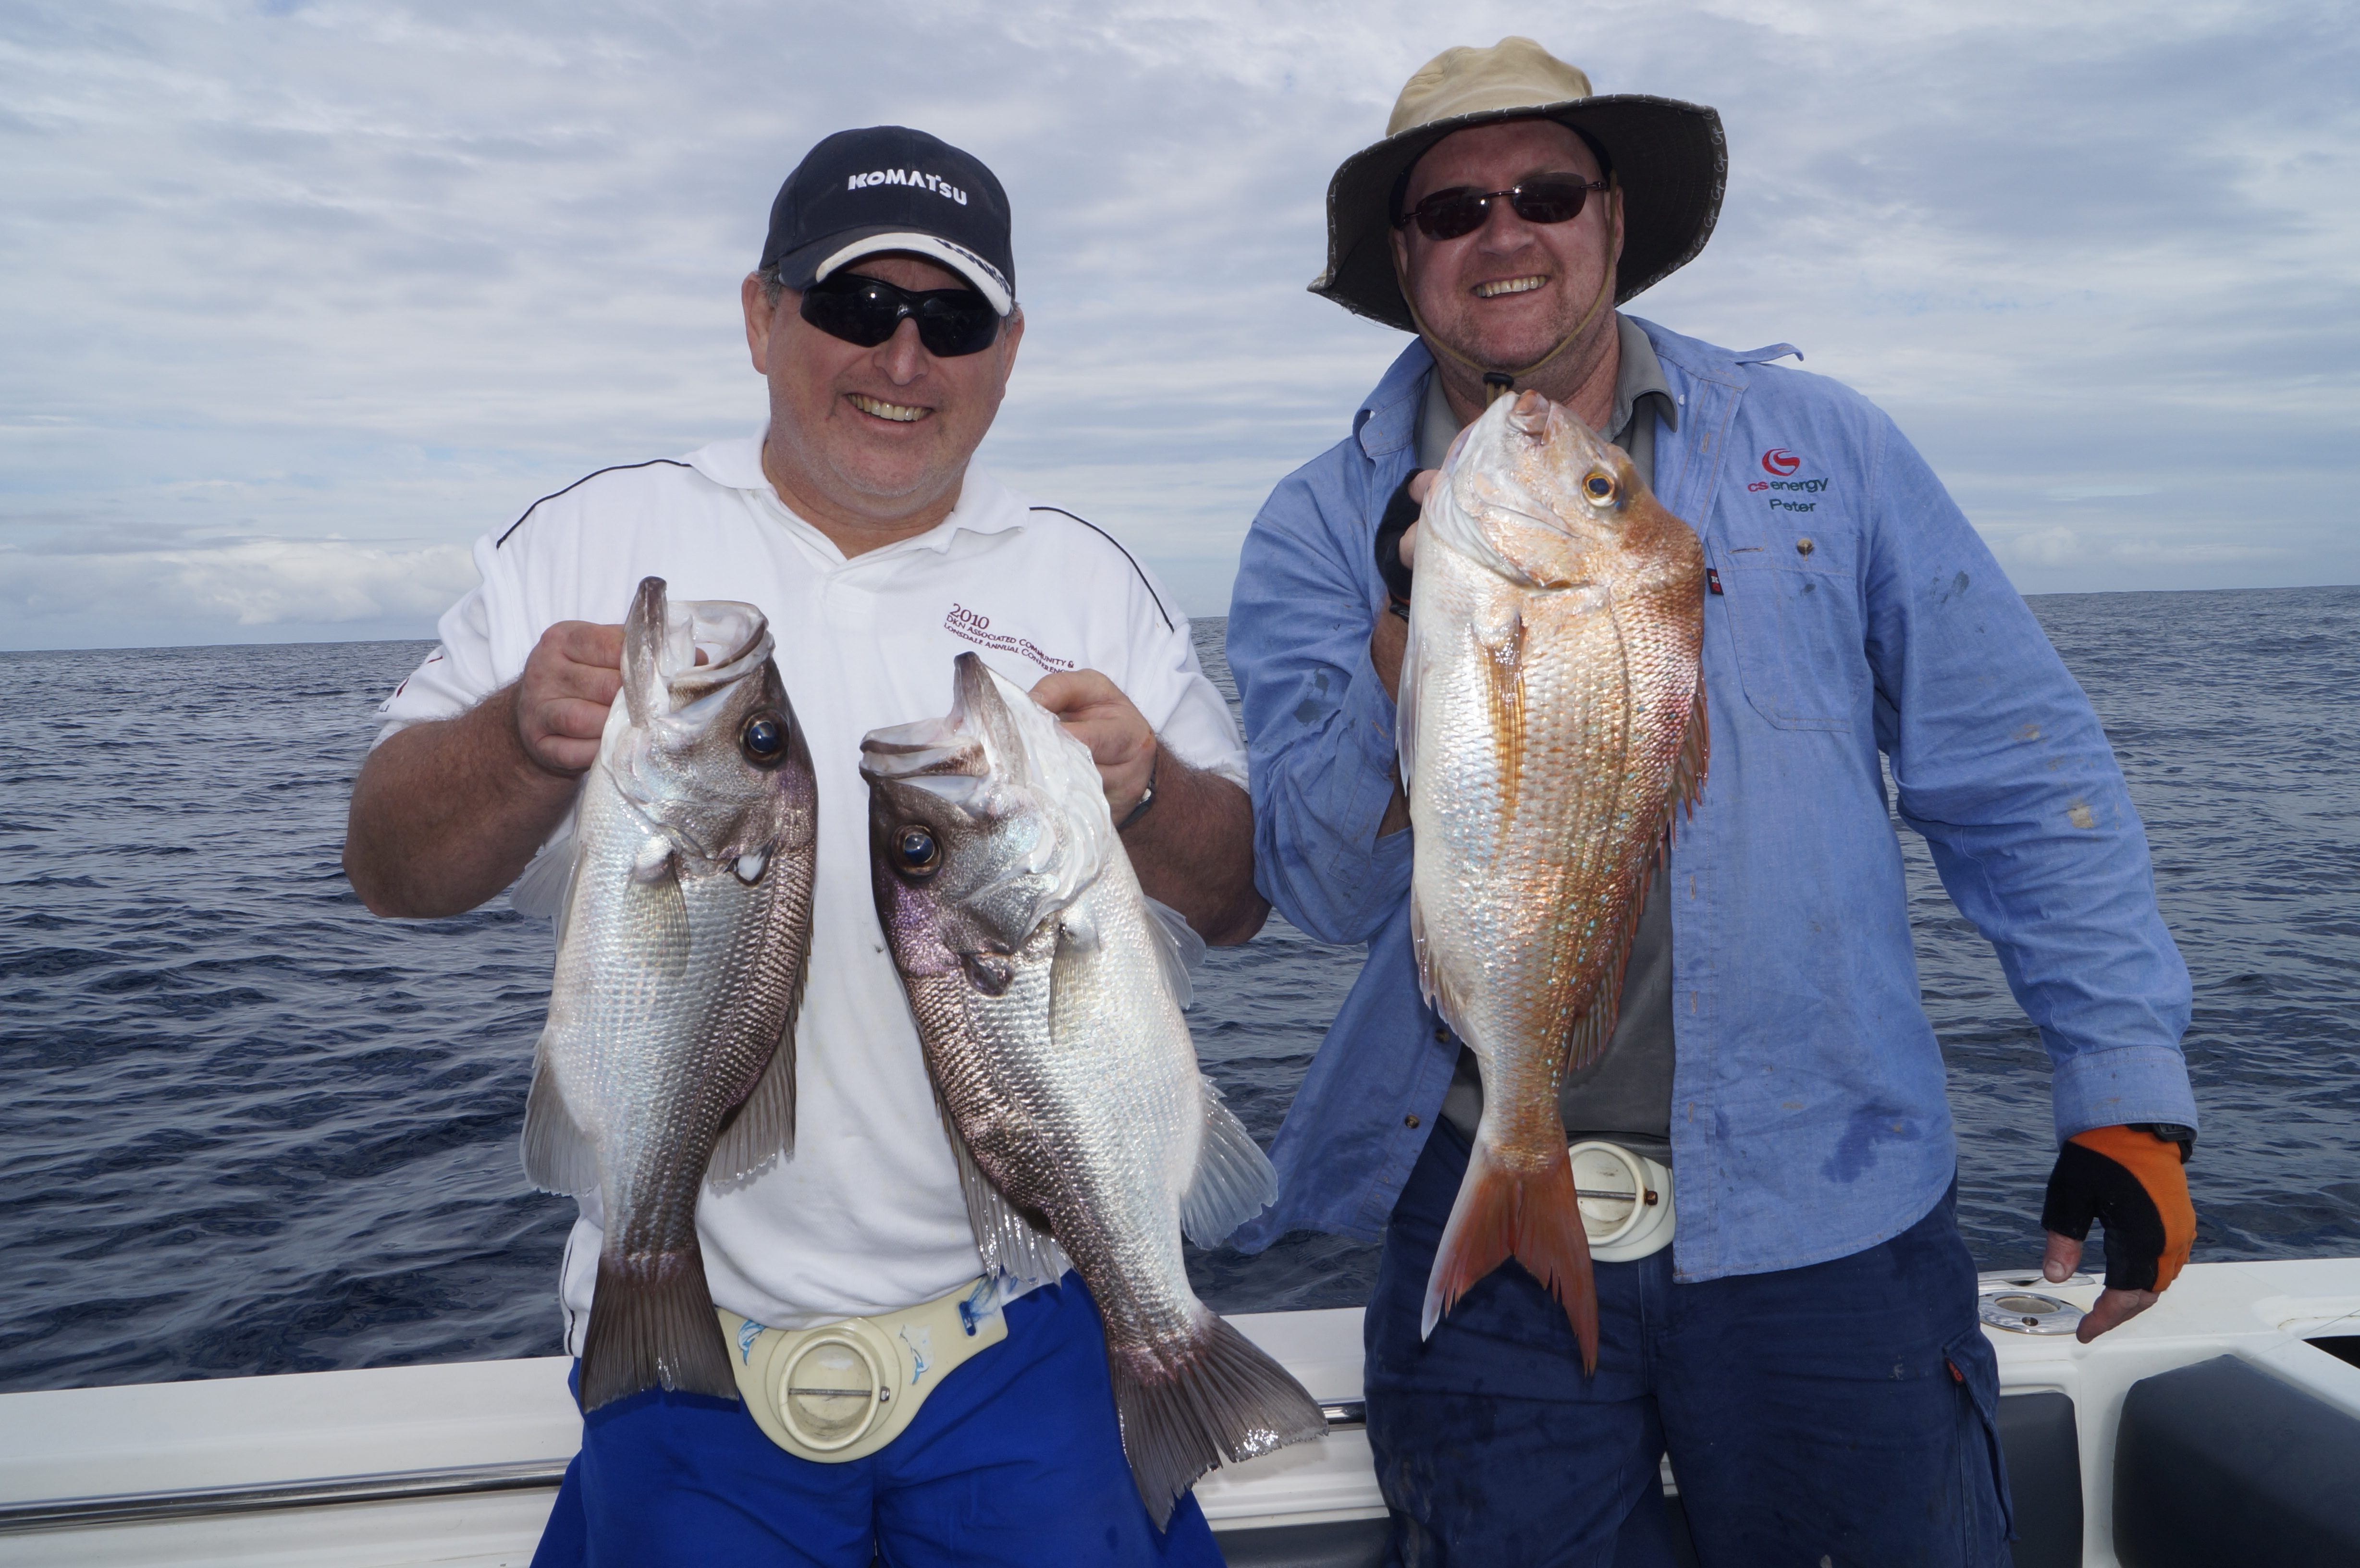 Shane French was stoked with his double hook-up of pearl perch and Peter Sherman was happy to land a solid winter snapper.